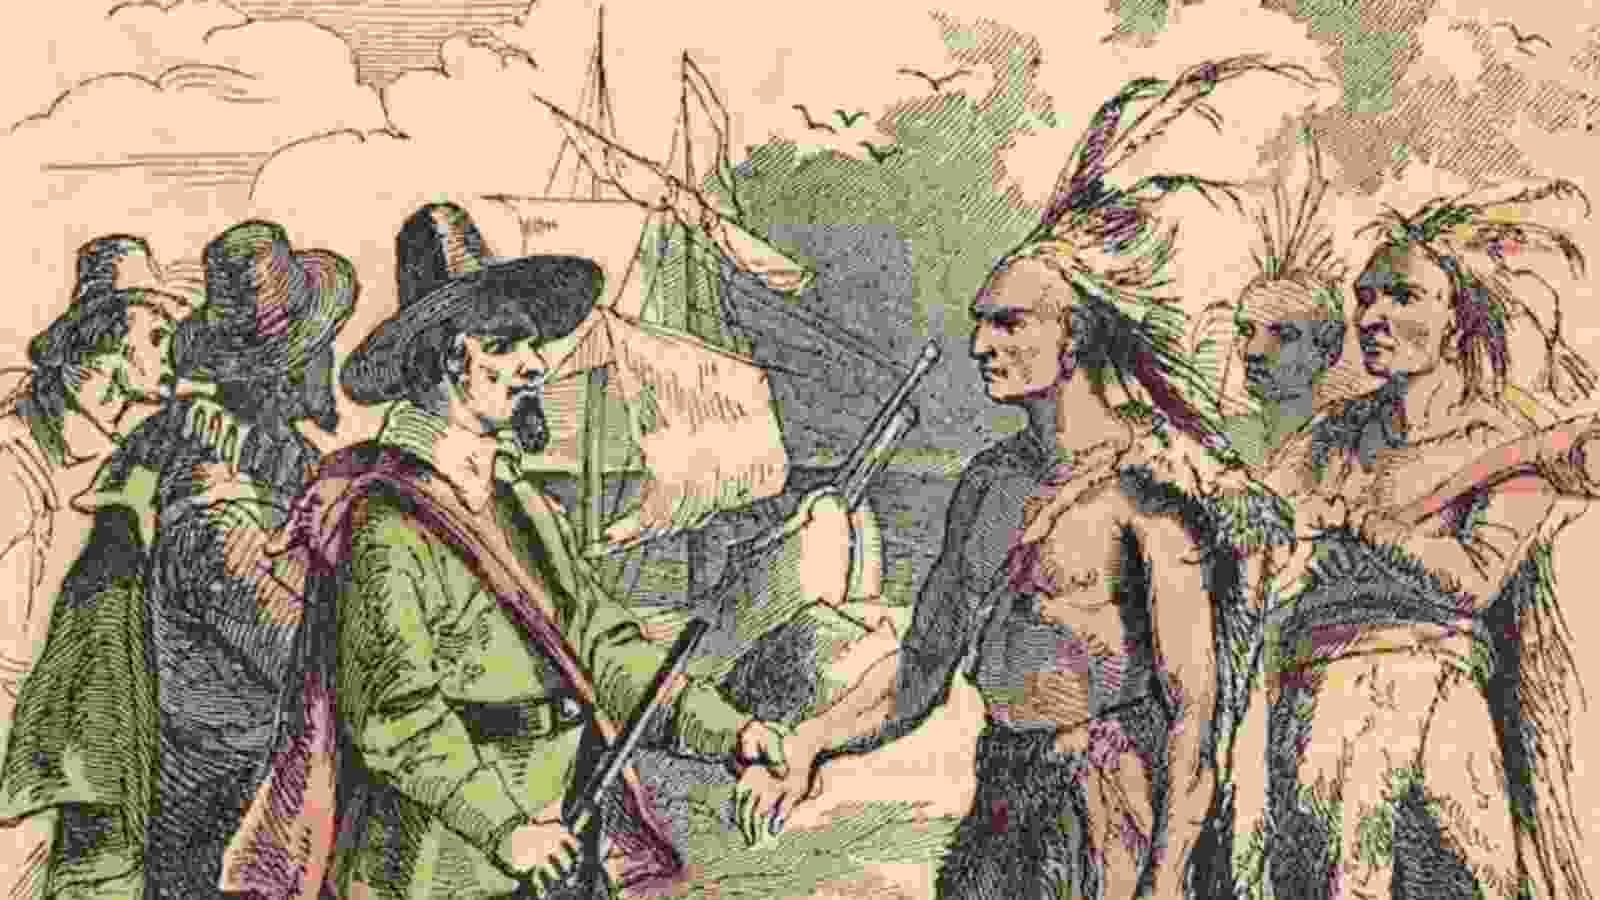 Tisquantum [Squanto] with the new settlers